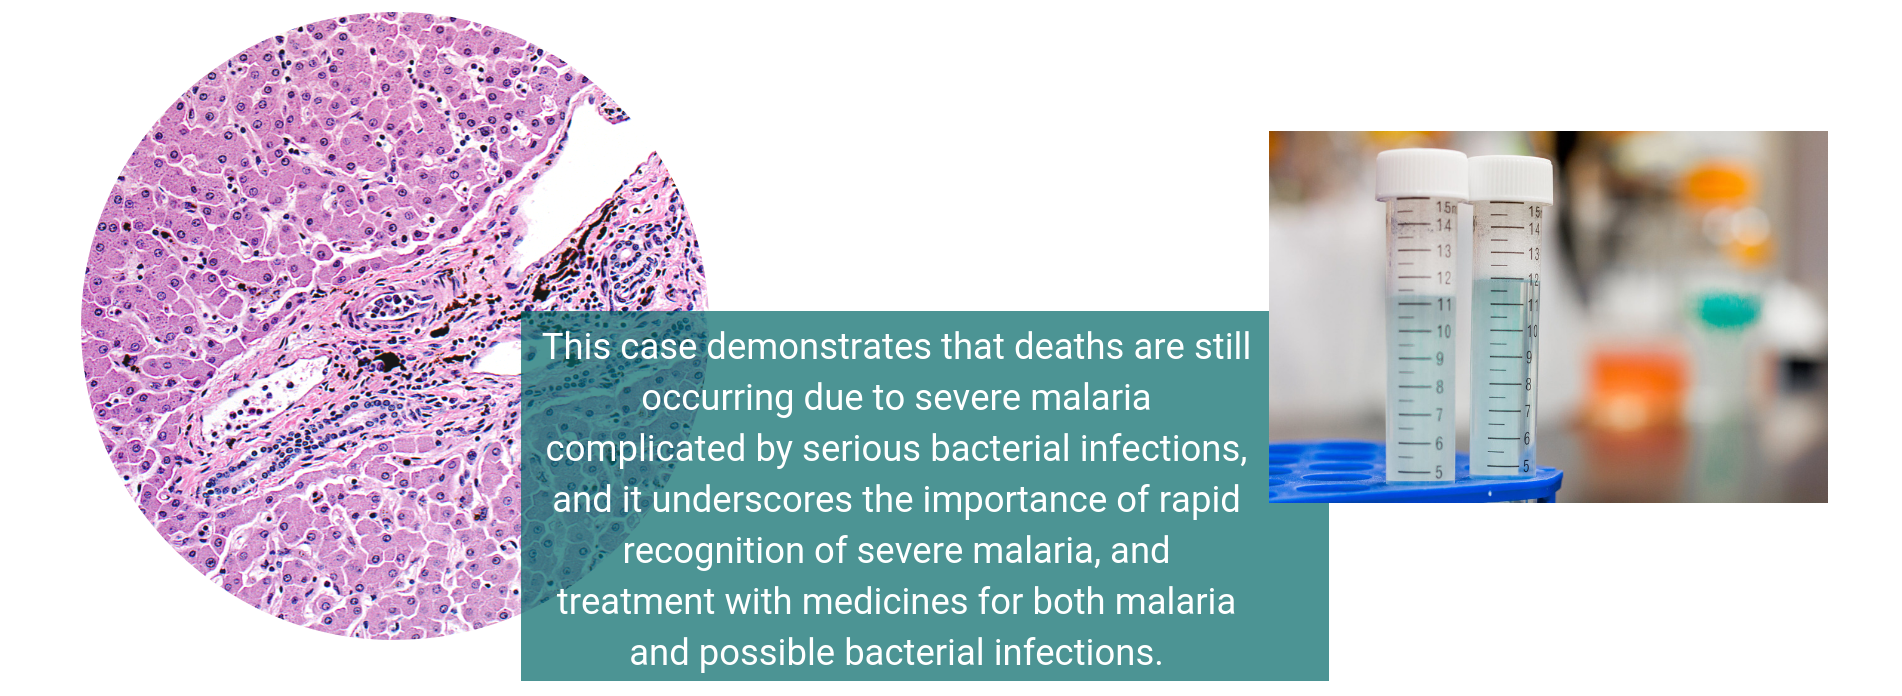 This case demonstrates that deaths are still occurring due to severe malaria complicated by serious bacterial infections, and it underscores the importance of rapid recognition of severe malaria and treatment with medicines for both malaria and possible bacterial infections.